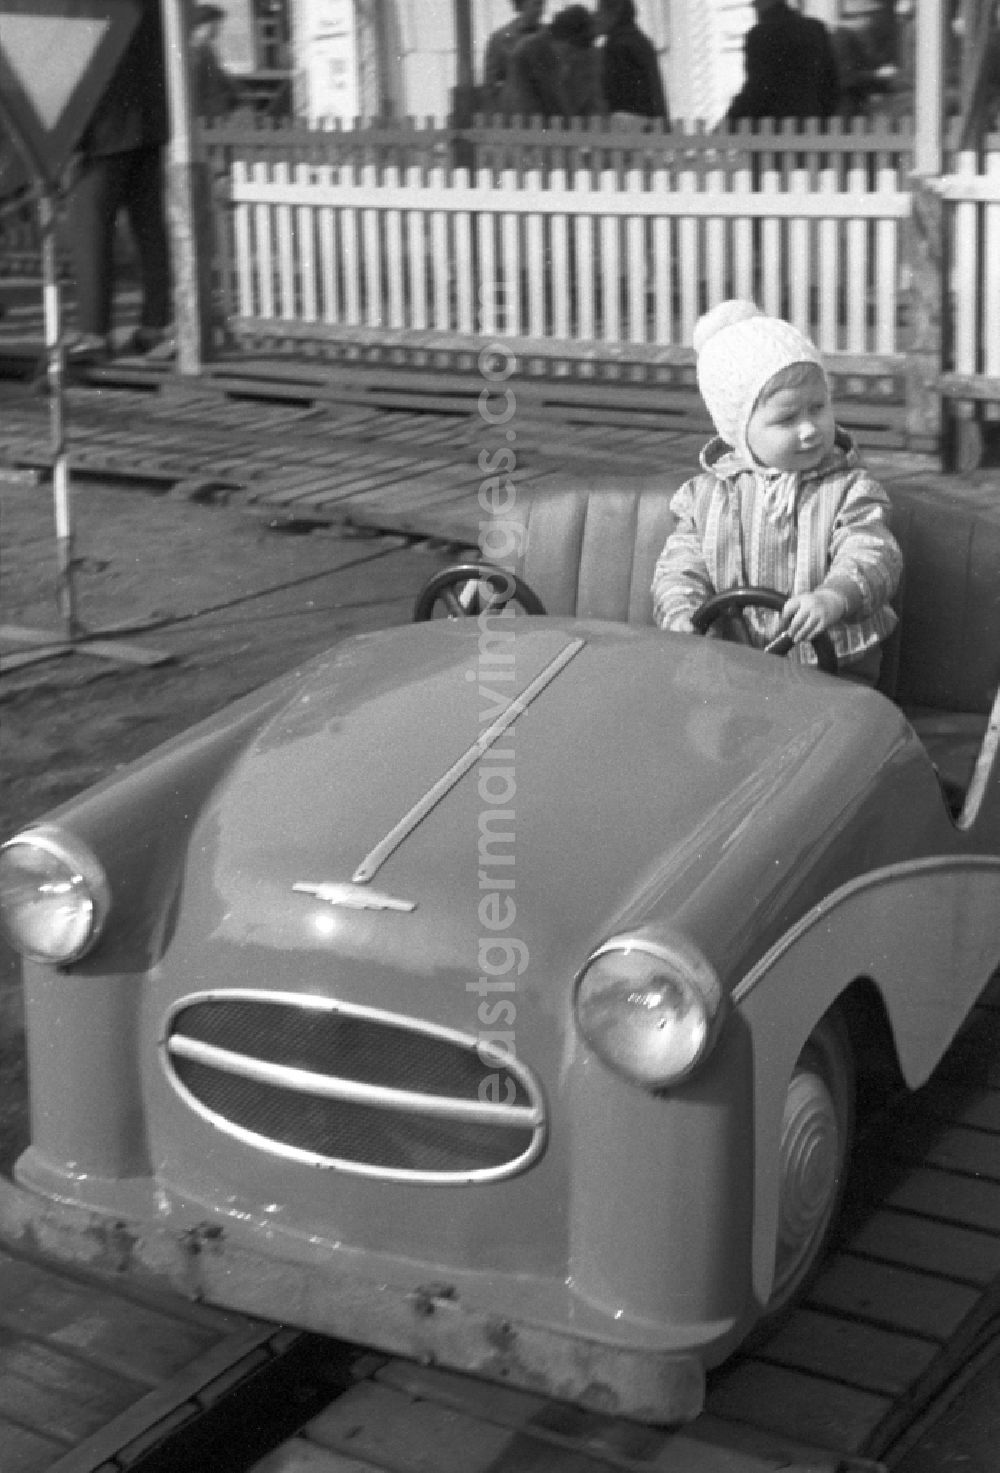 GDR image archive: Magdeburg - Children at the fair. Here in a bumper car ride. The Magdeburg Spring Fair, a three-week frenzy early spring, takes place annually at the Exhibition Place Max Wille at the Small Town march right on the banks of the Elbe